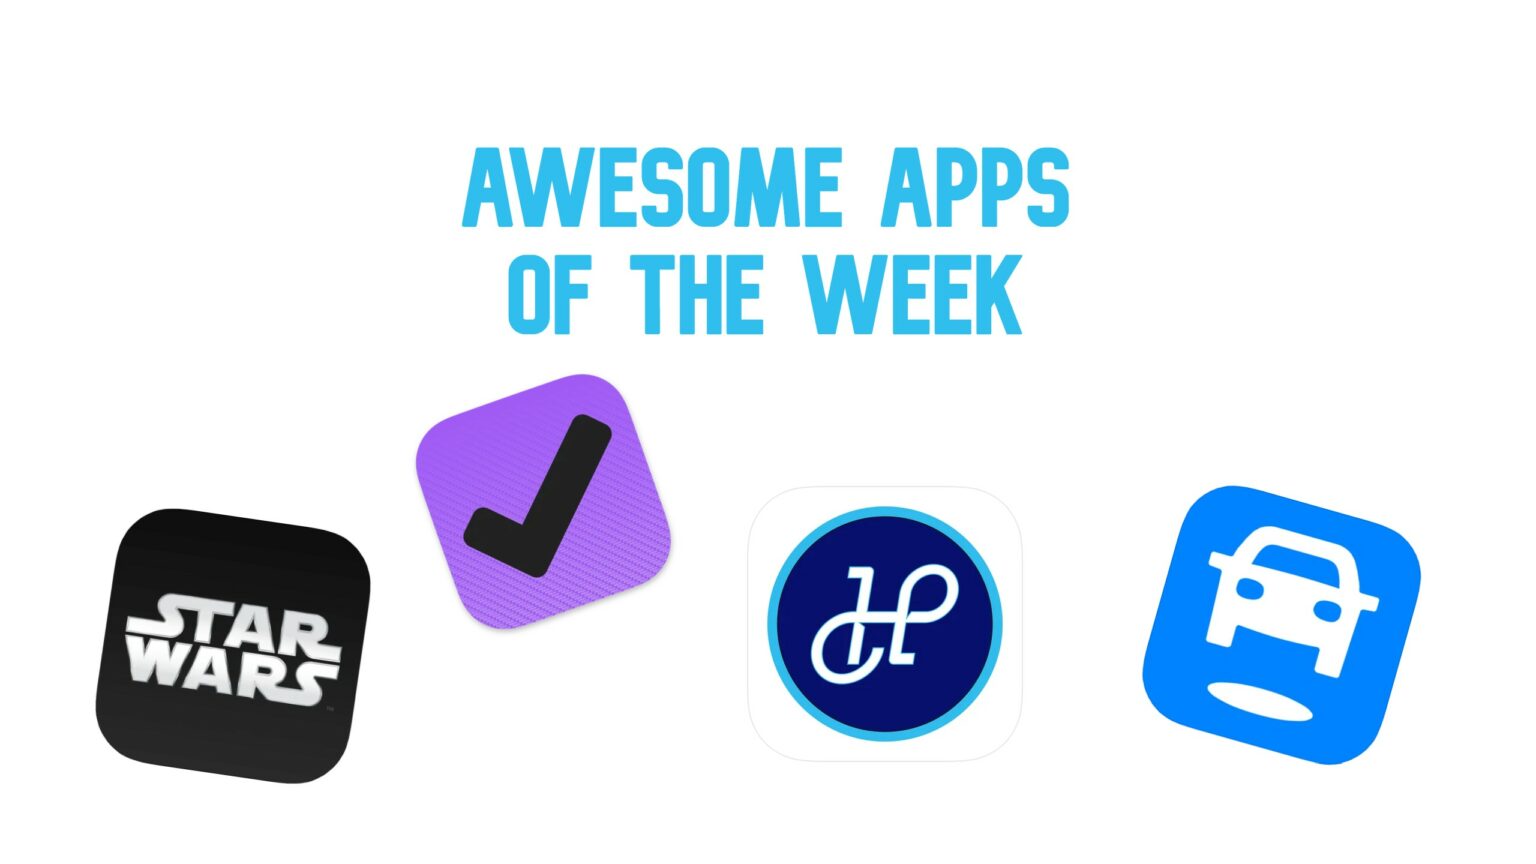 What kind of lunatic wants to show up in Din Djarin's holopuck?1? Awesome Apps of the Week include Star Wars, HomePage, OmniFocus and SpotHero.